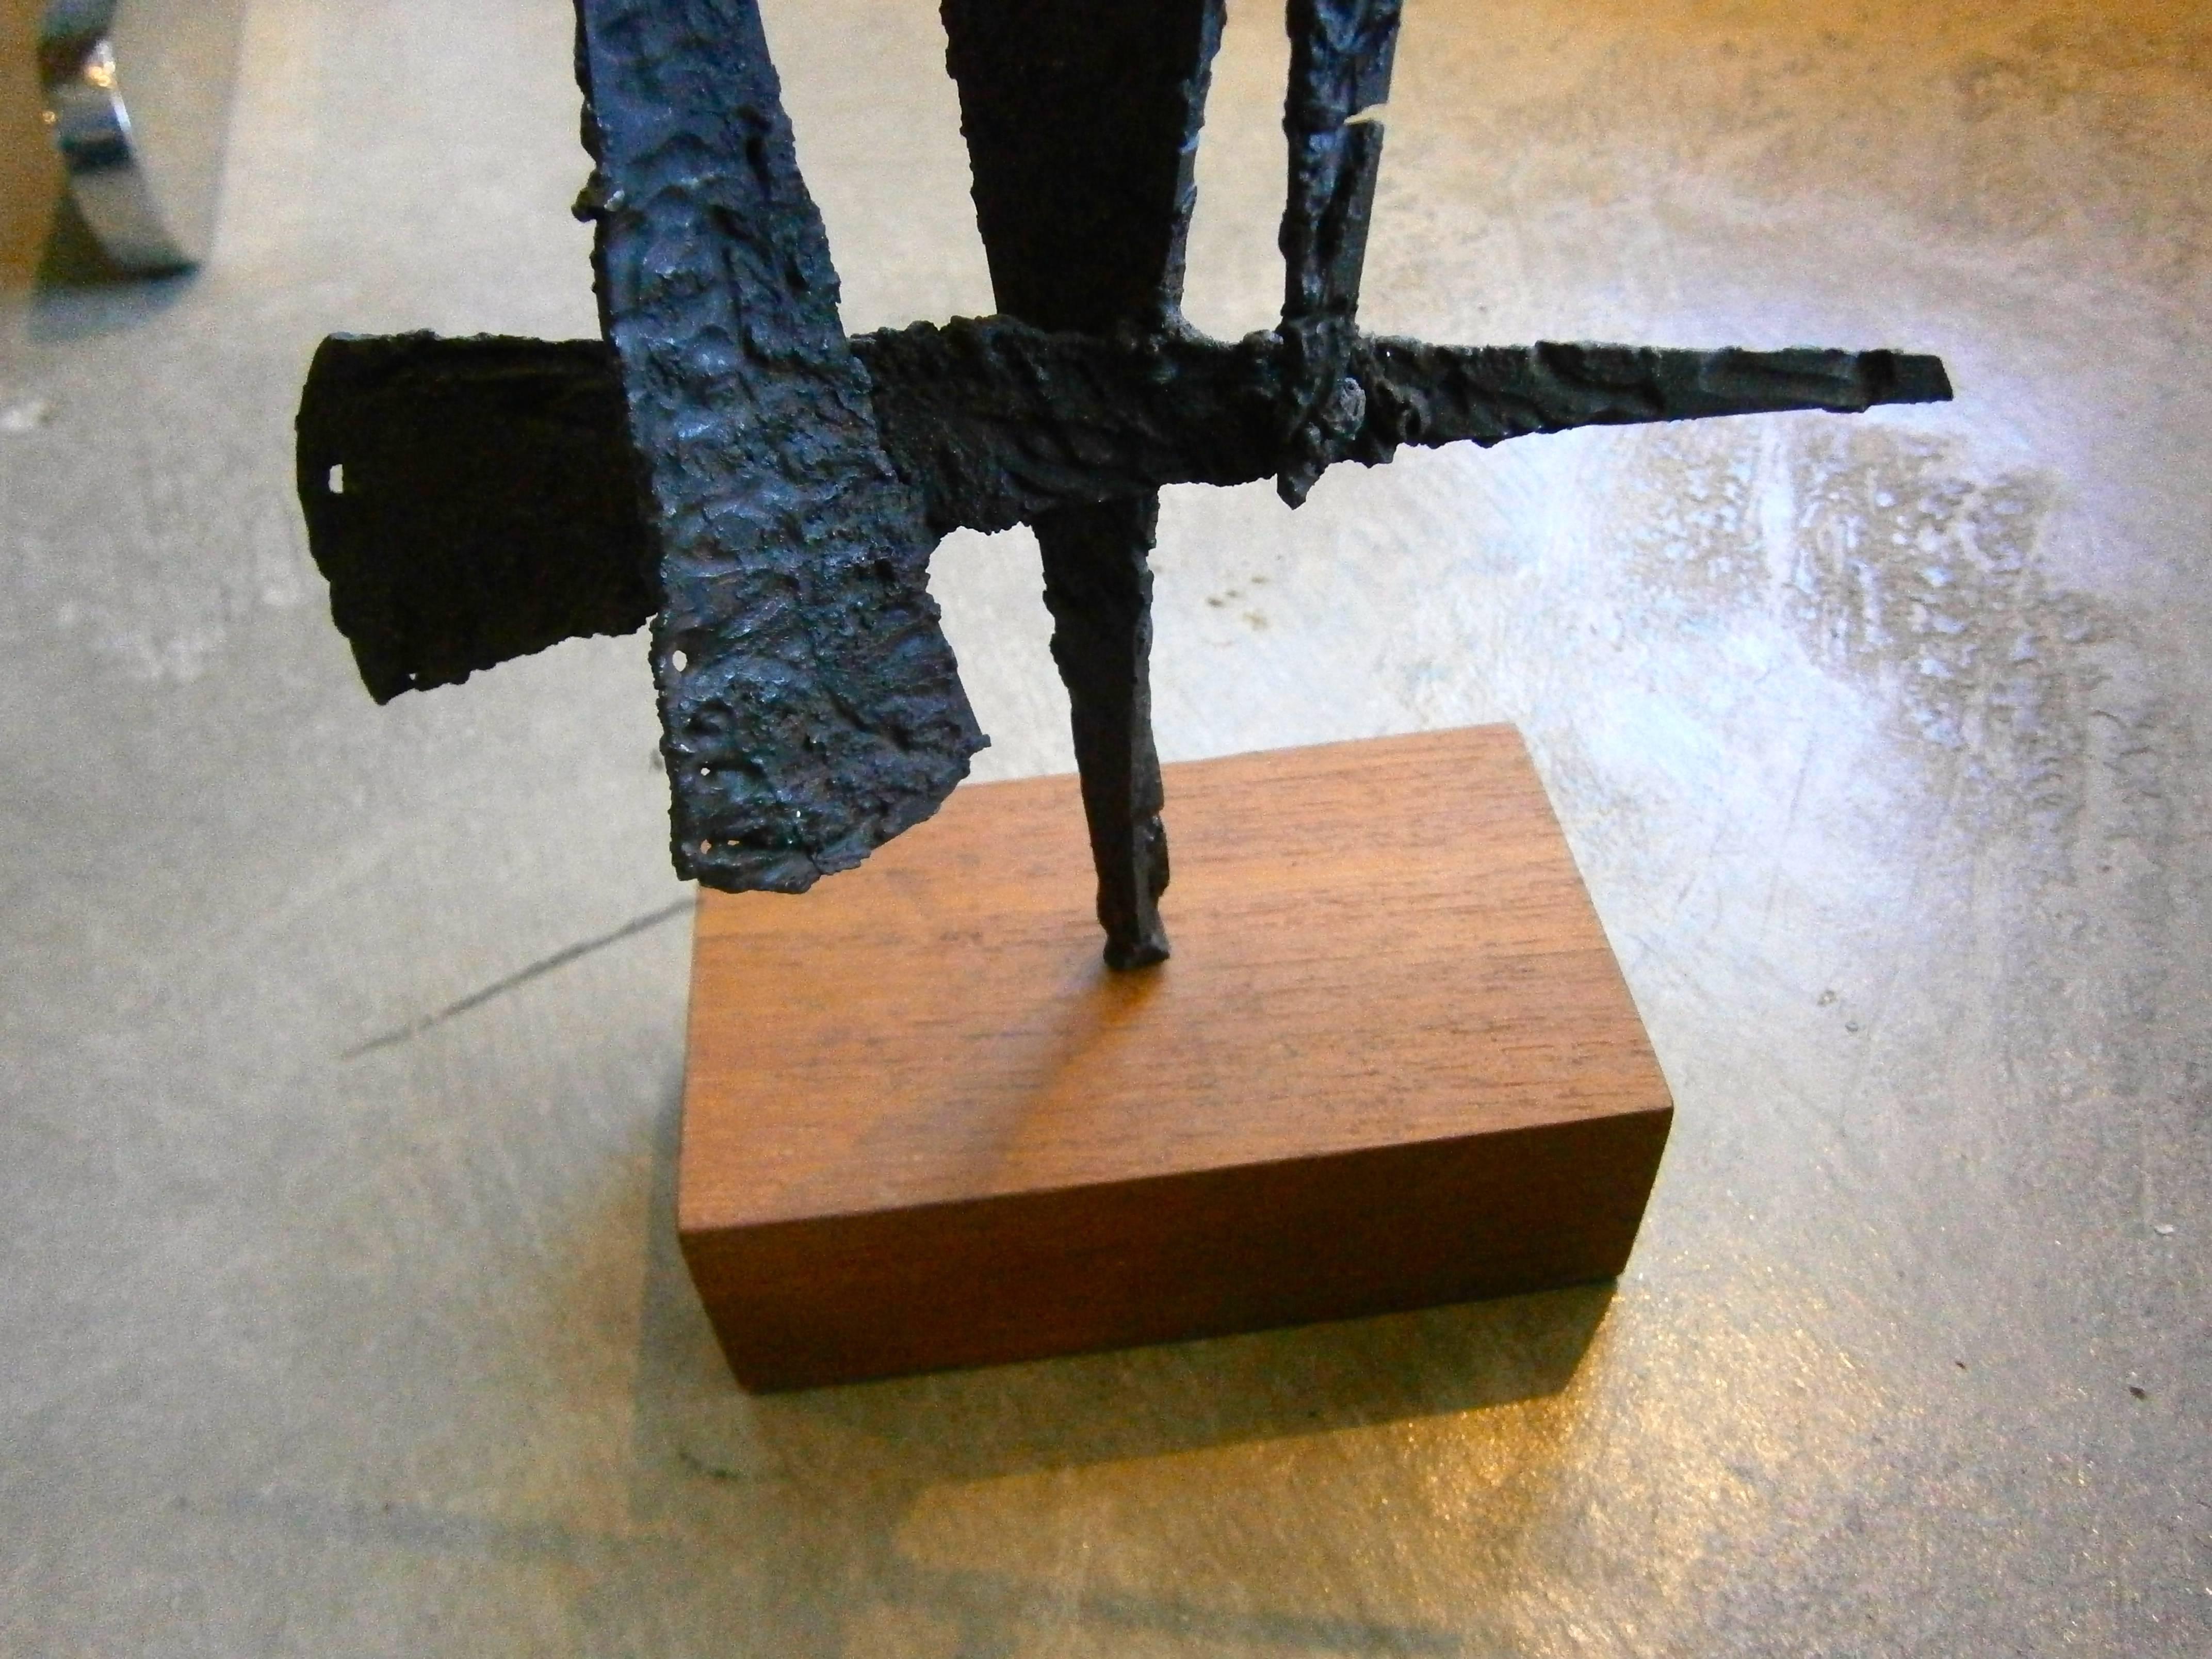 Contemporary Torch-Cut Steel Brutal Sculpture by American Artist Joey Vaiasuso 1